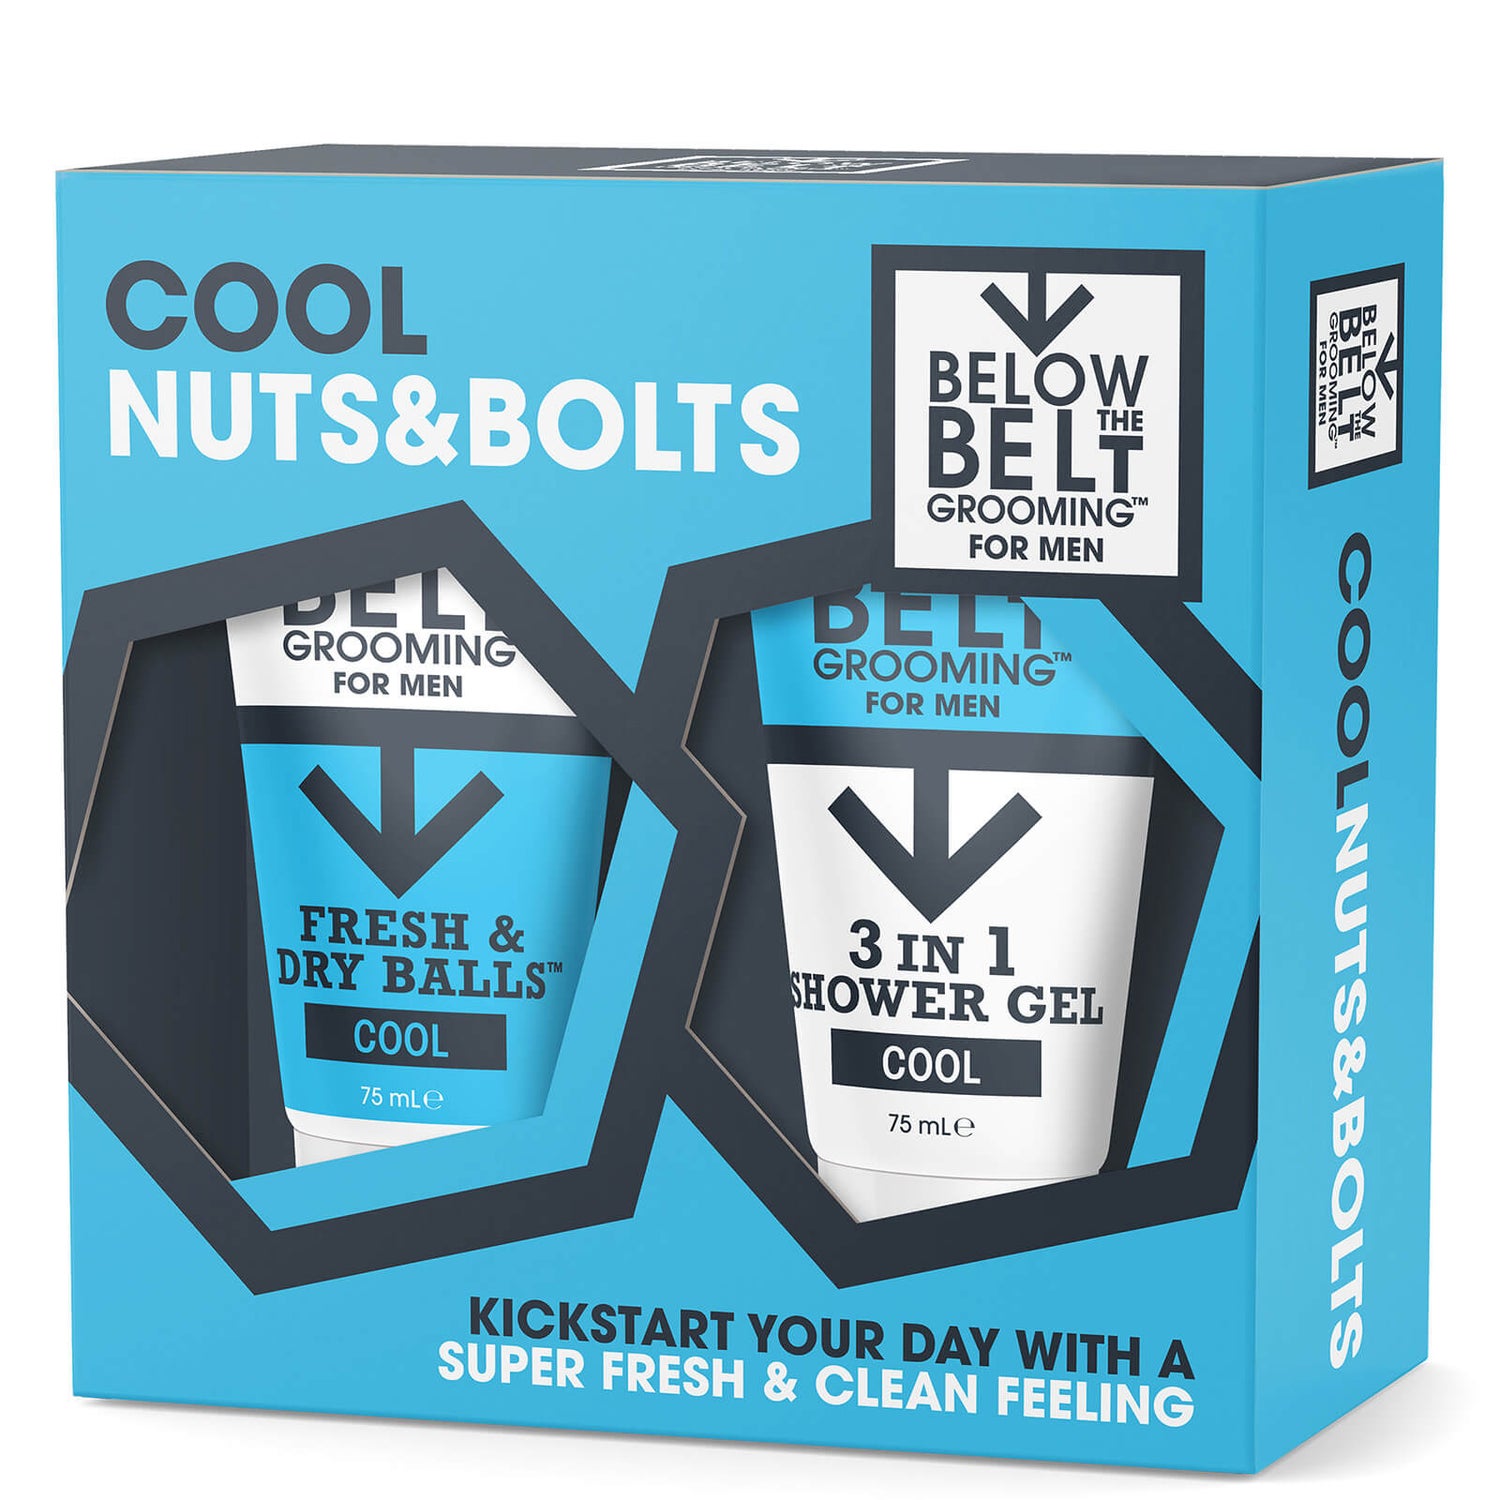 Набор Below the Belt Grooming Cool Nuts and Bolts